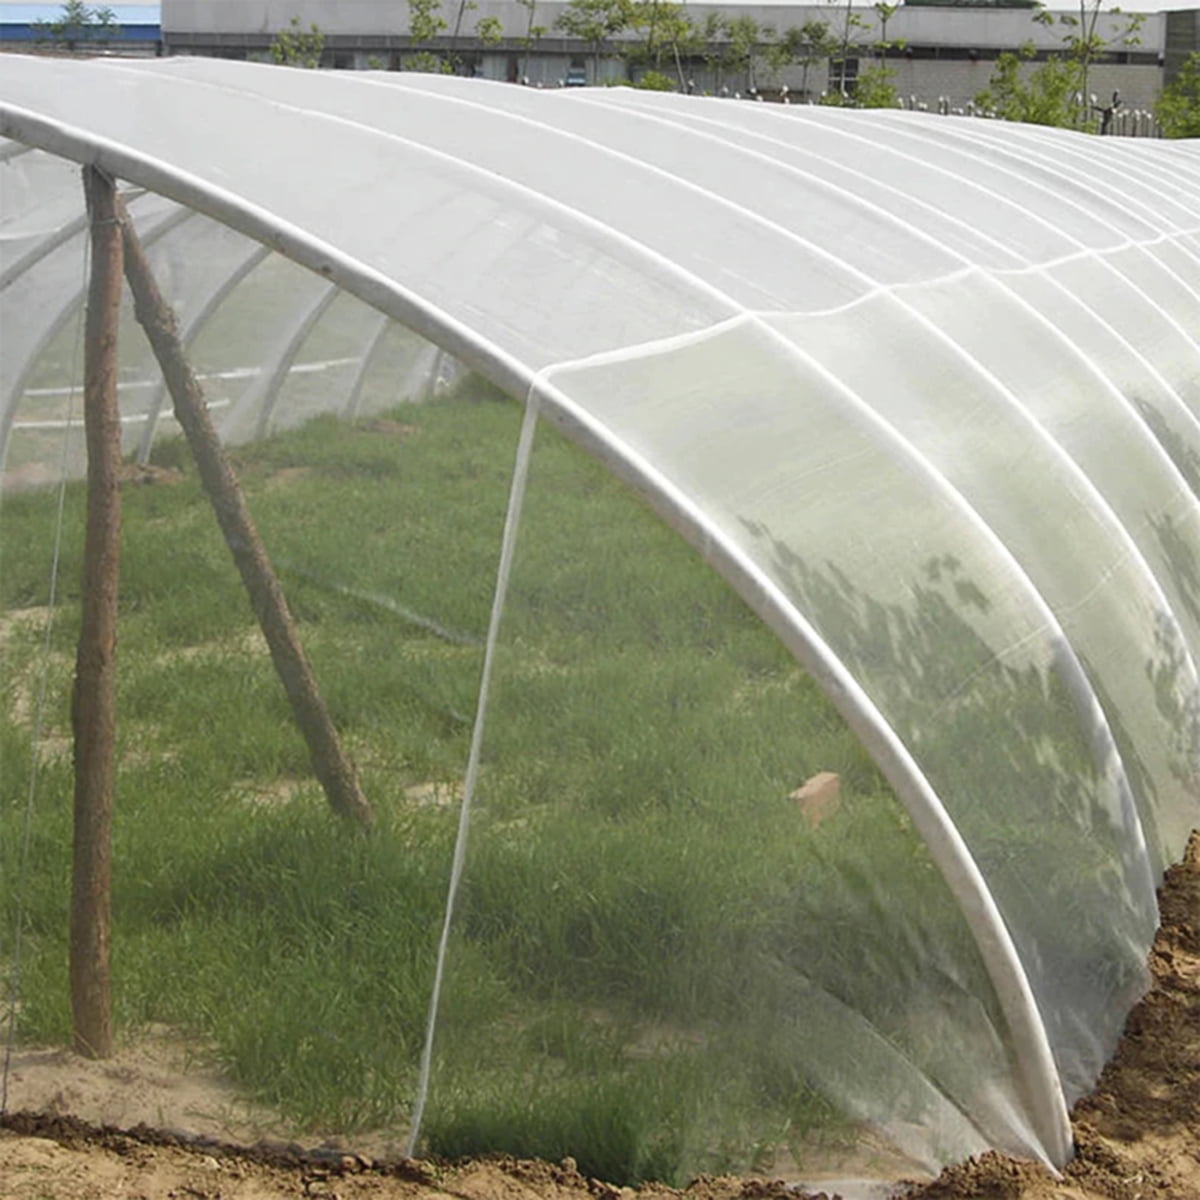 Agfabric 2.4Mil Plastic Covering Clear Polyethylene Greenhouse Film UV Resistant for Grow Tunnel and Garden Hoop Plant Cover&Frost Blanket for Season Extension Keep Warm and Frost Protection,6x16ft 